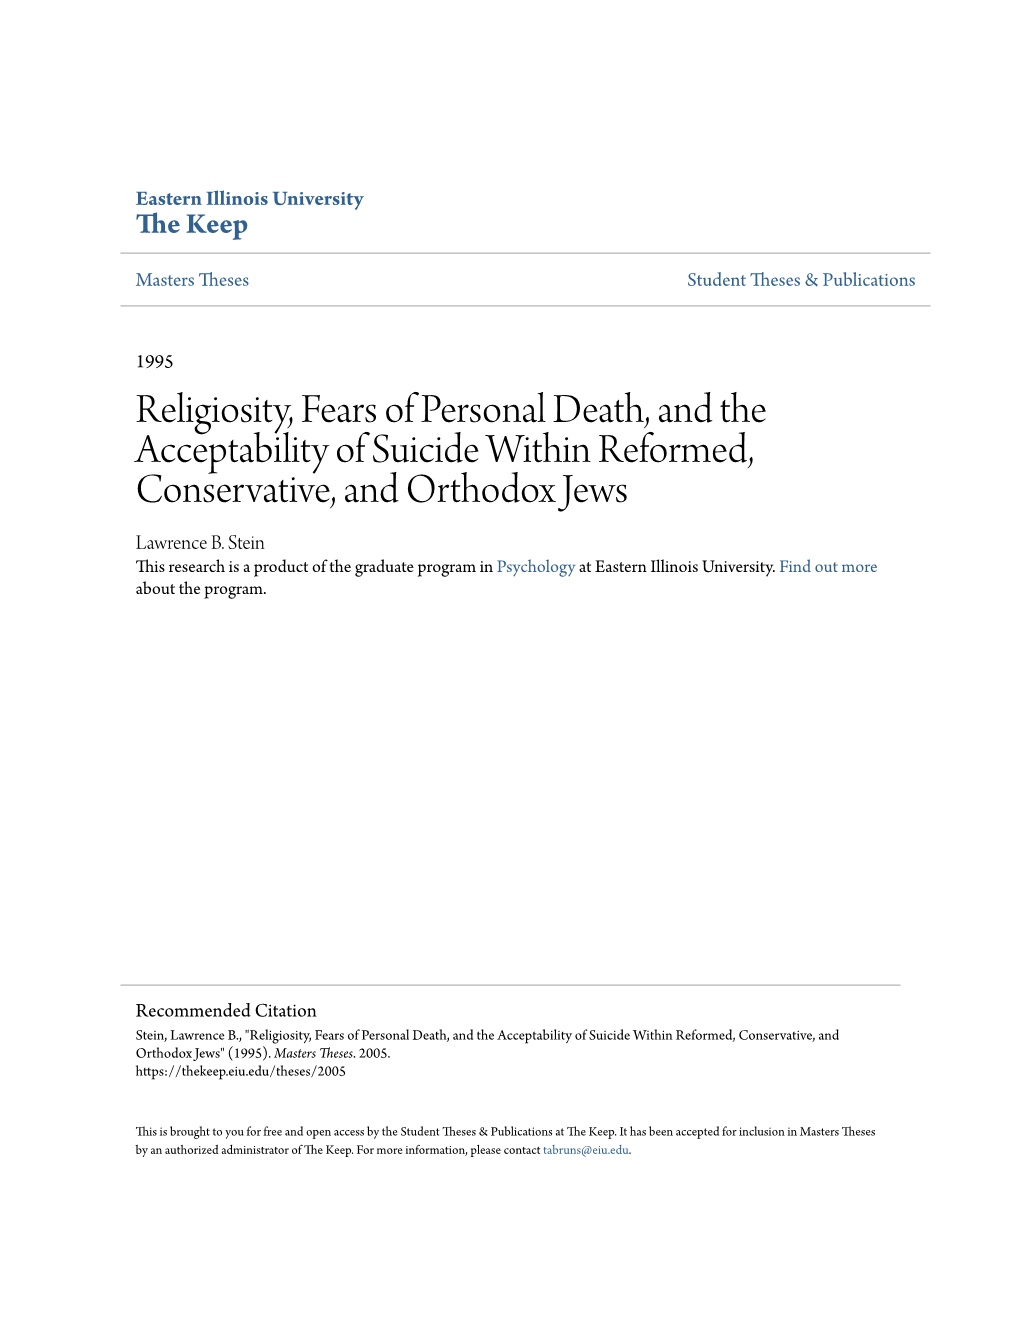 Religiosity, Fears of Personal Death, and the Acceptability of Suicide Within Reformed, Conservative, and Orthodox Jews Lawrence B